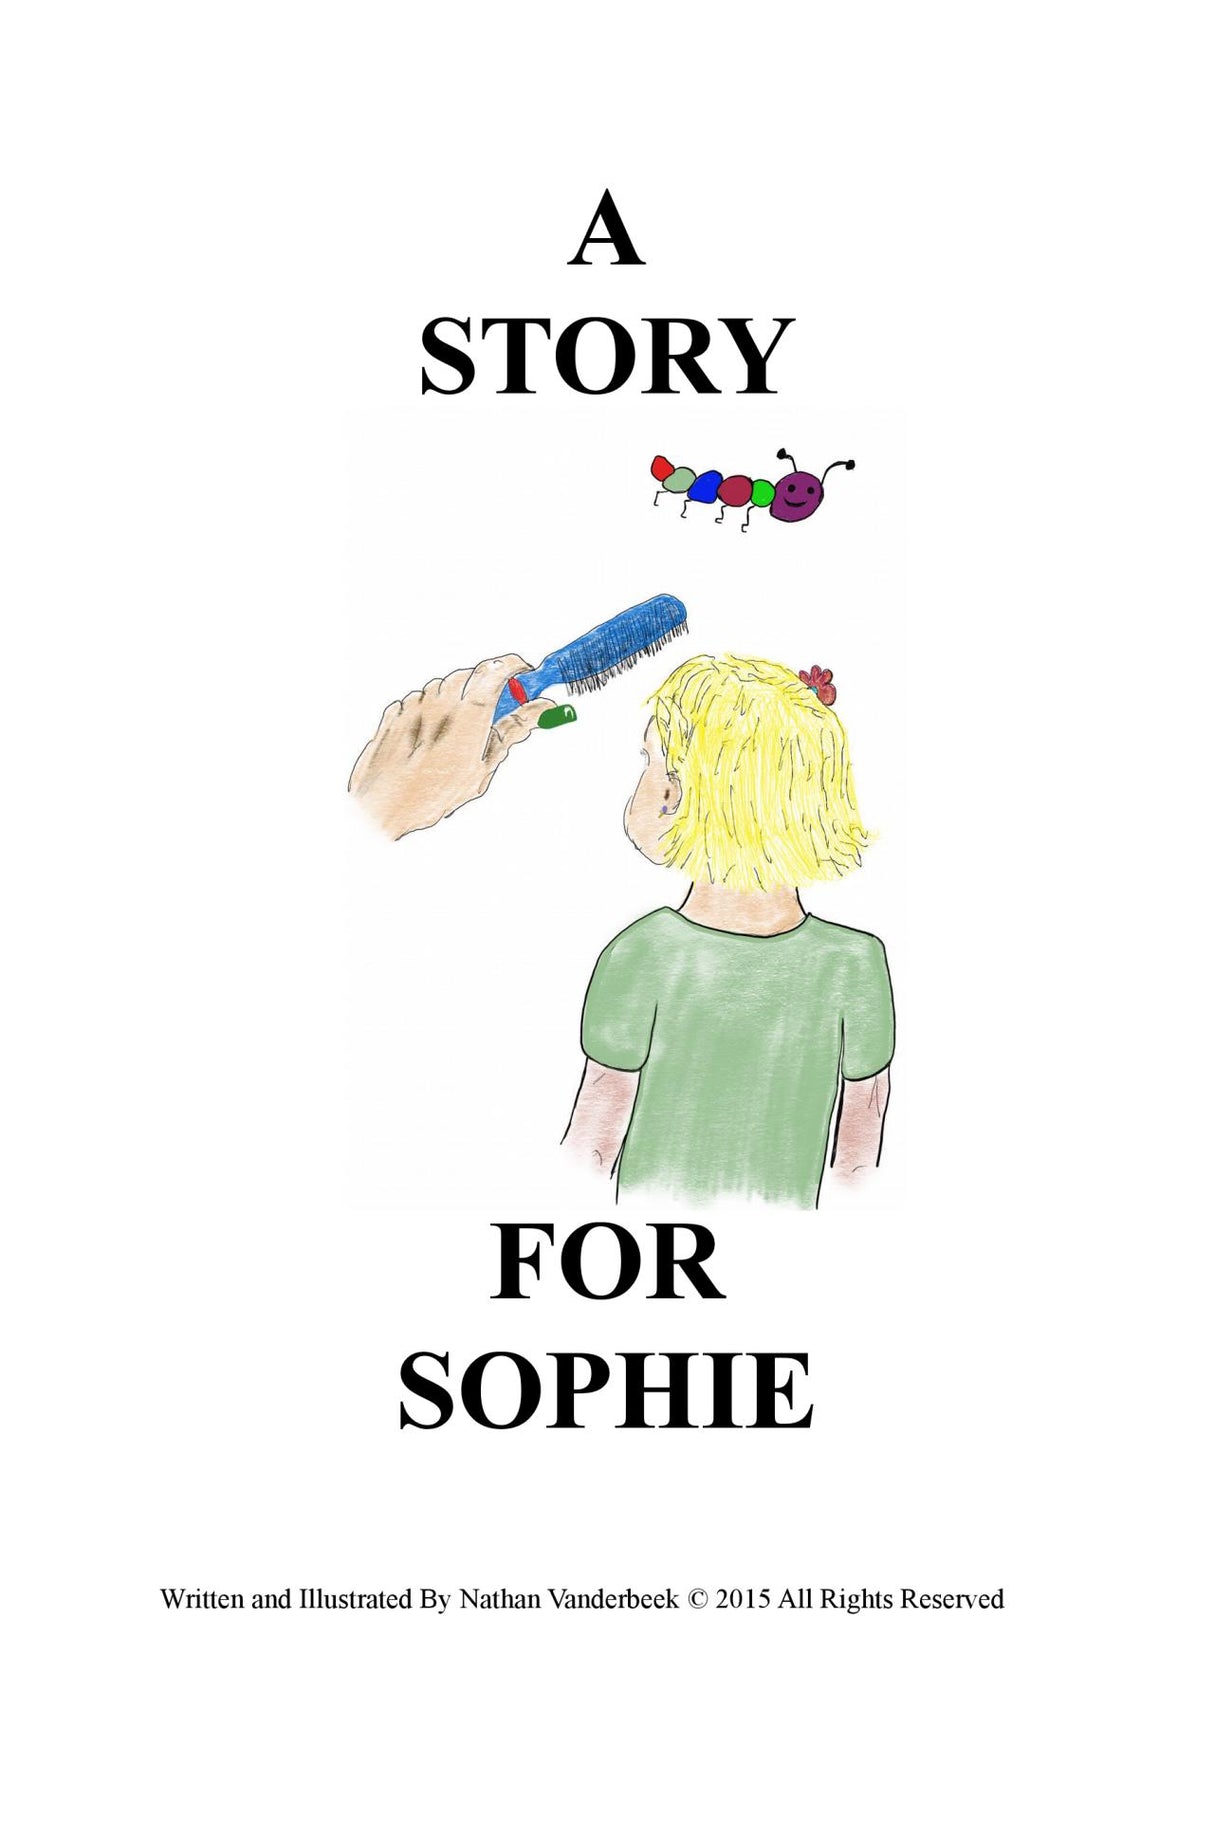 A STORY FOR SOPHIE